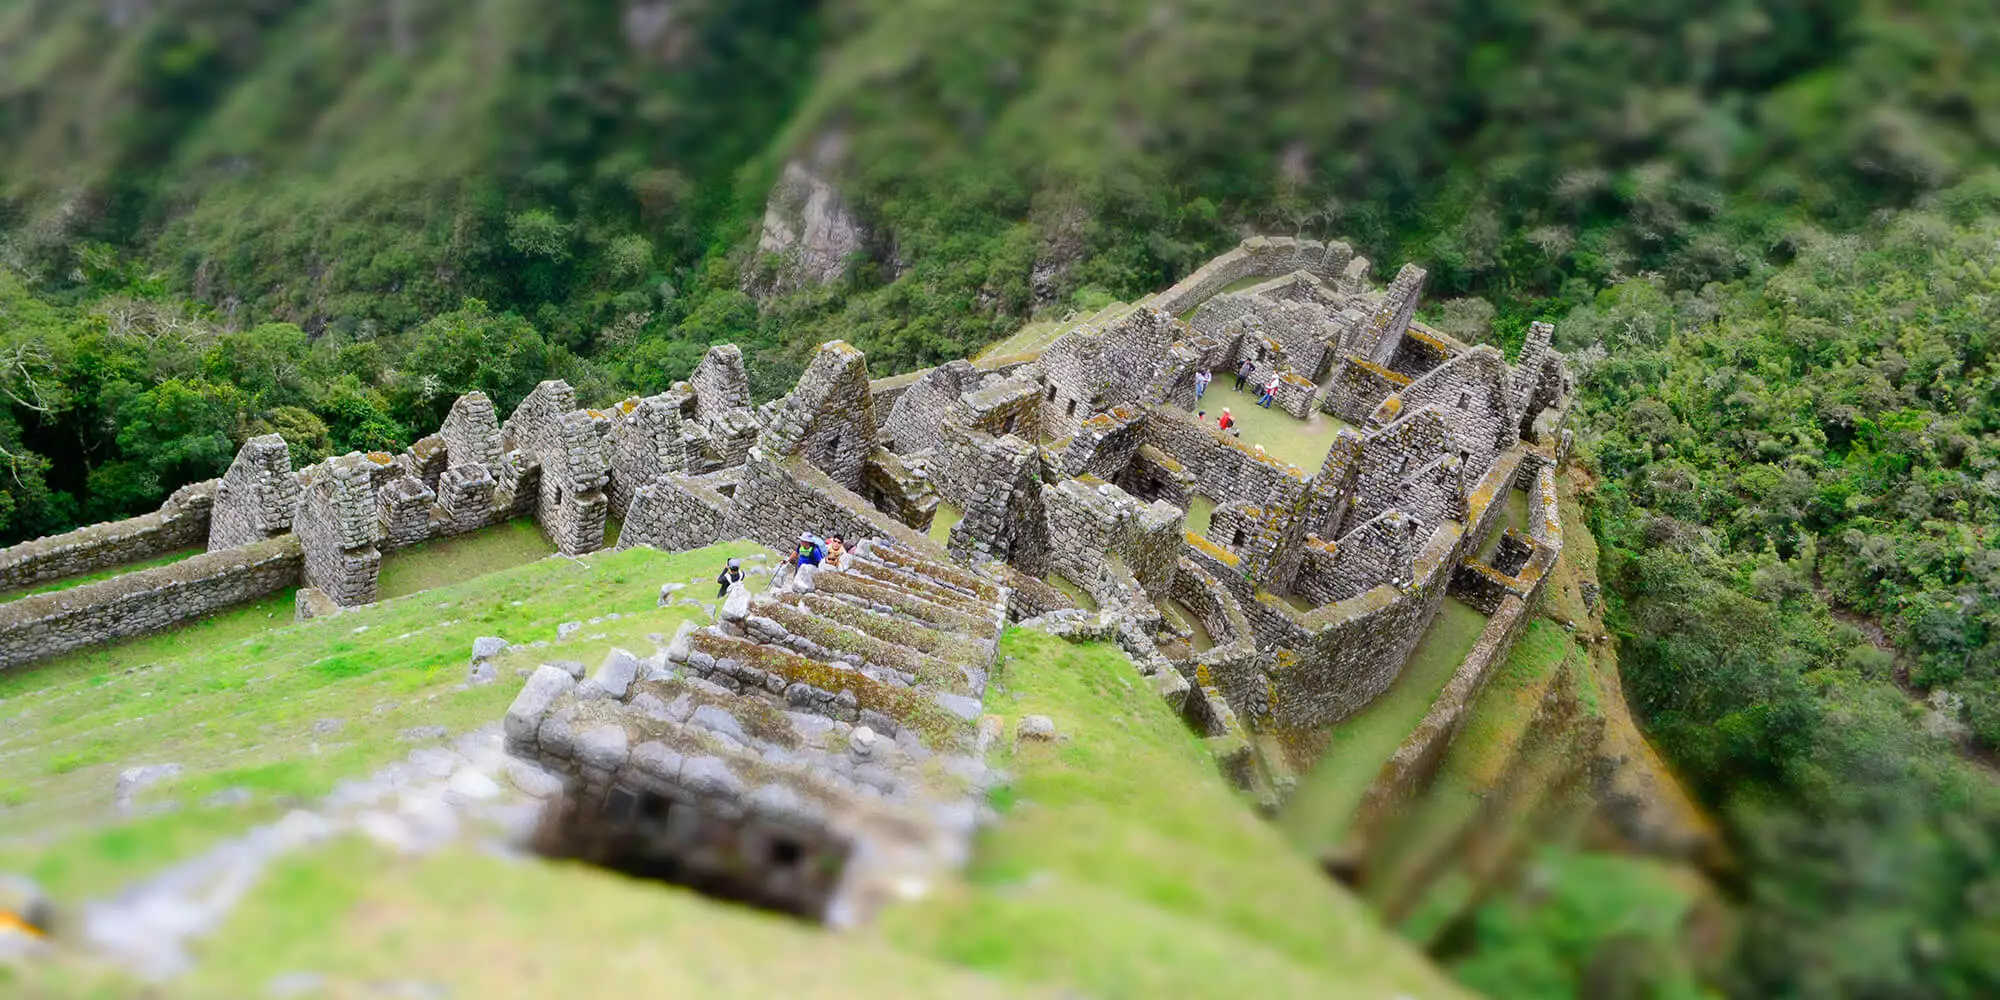 Frequently Asked Questions About the Inca Trail